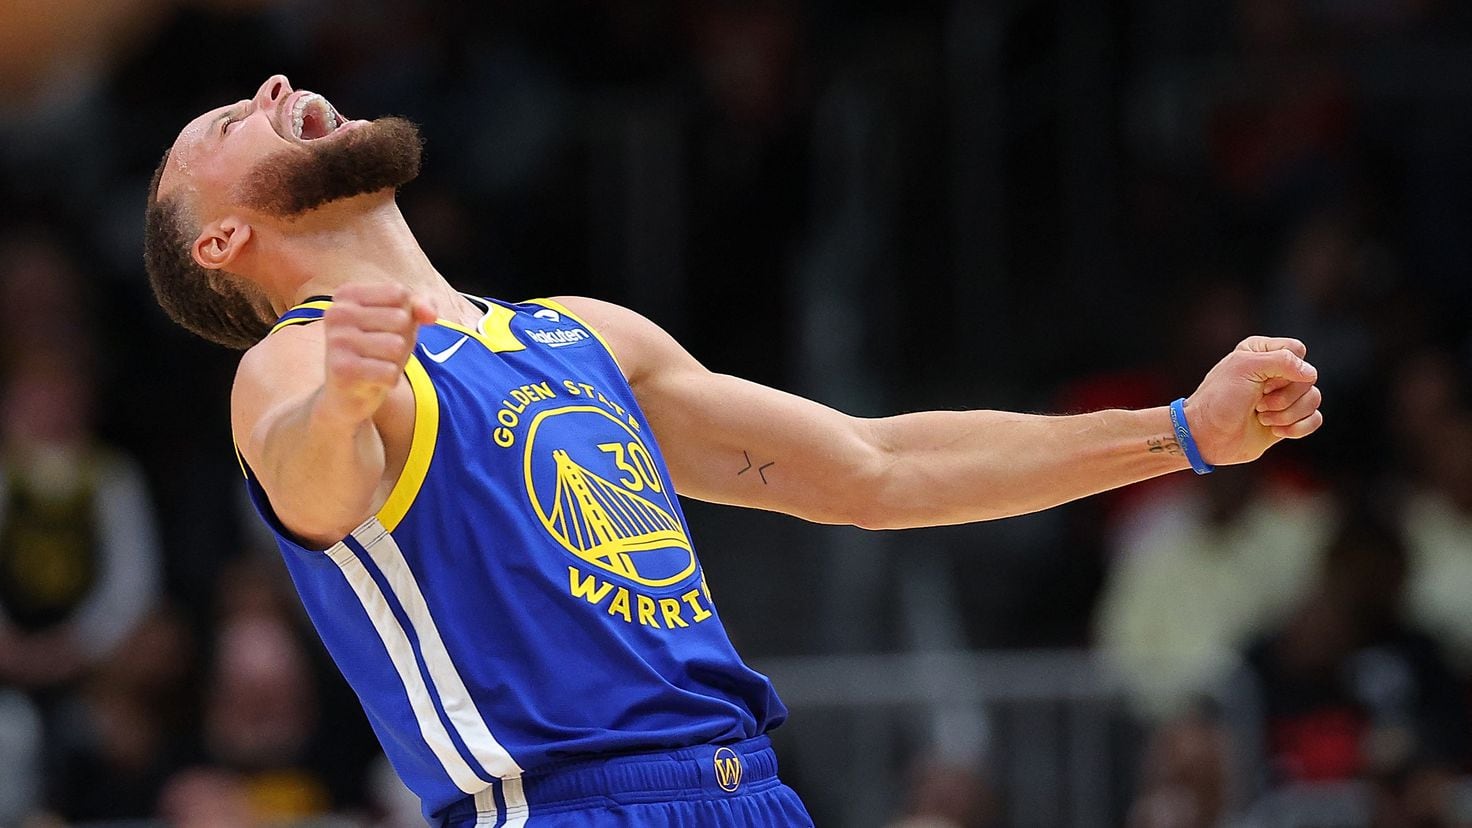 Kevin Durant on Steph Curry: “He's the best in history”